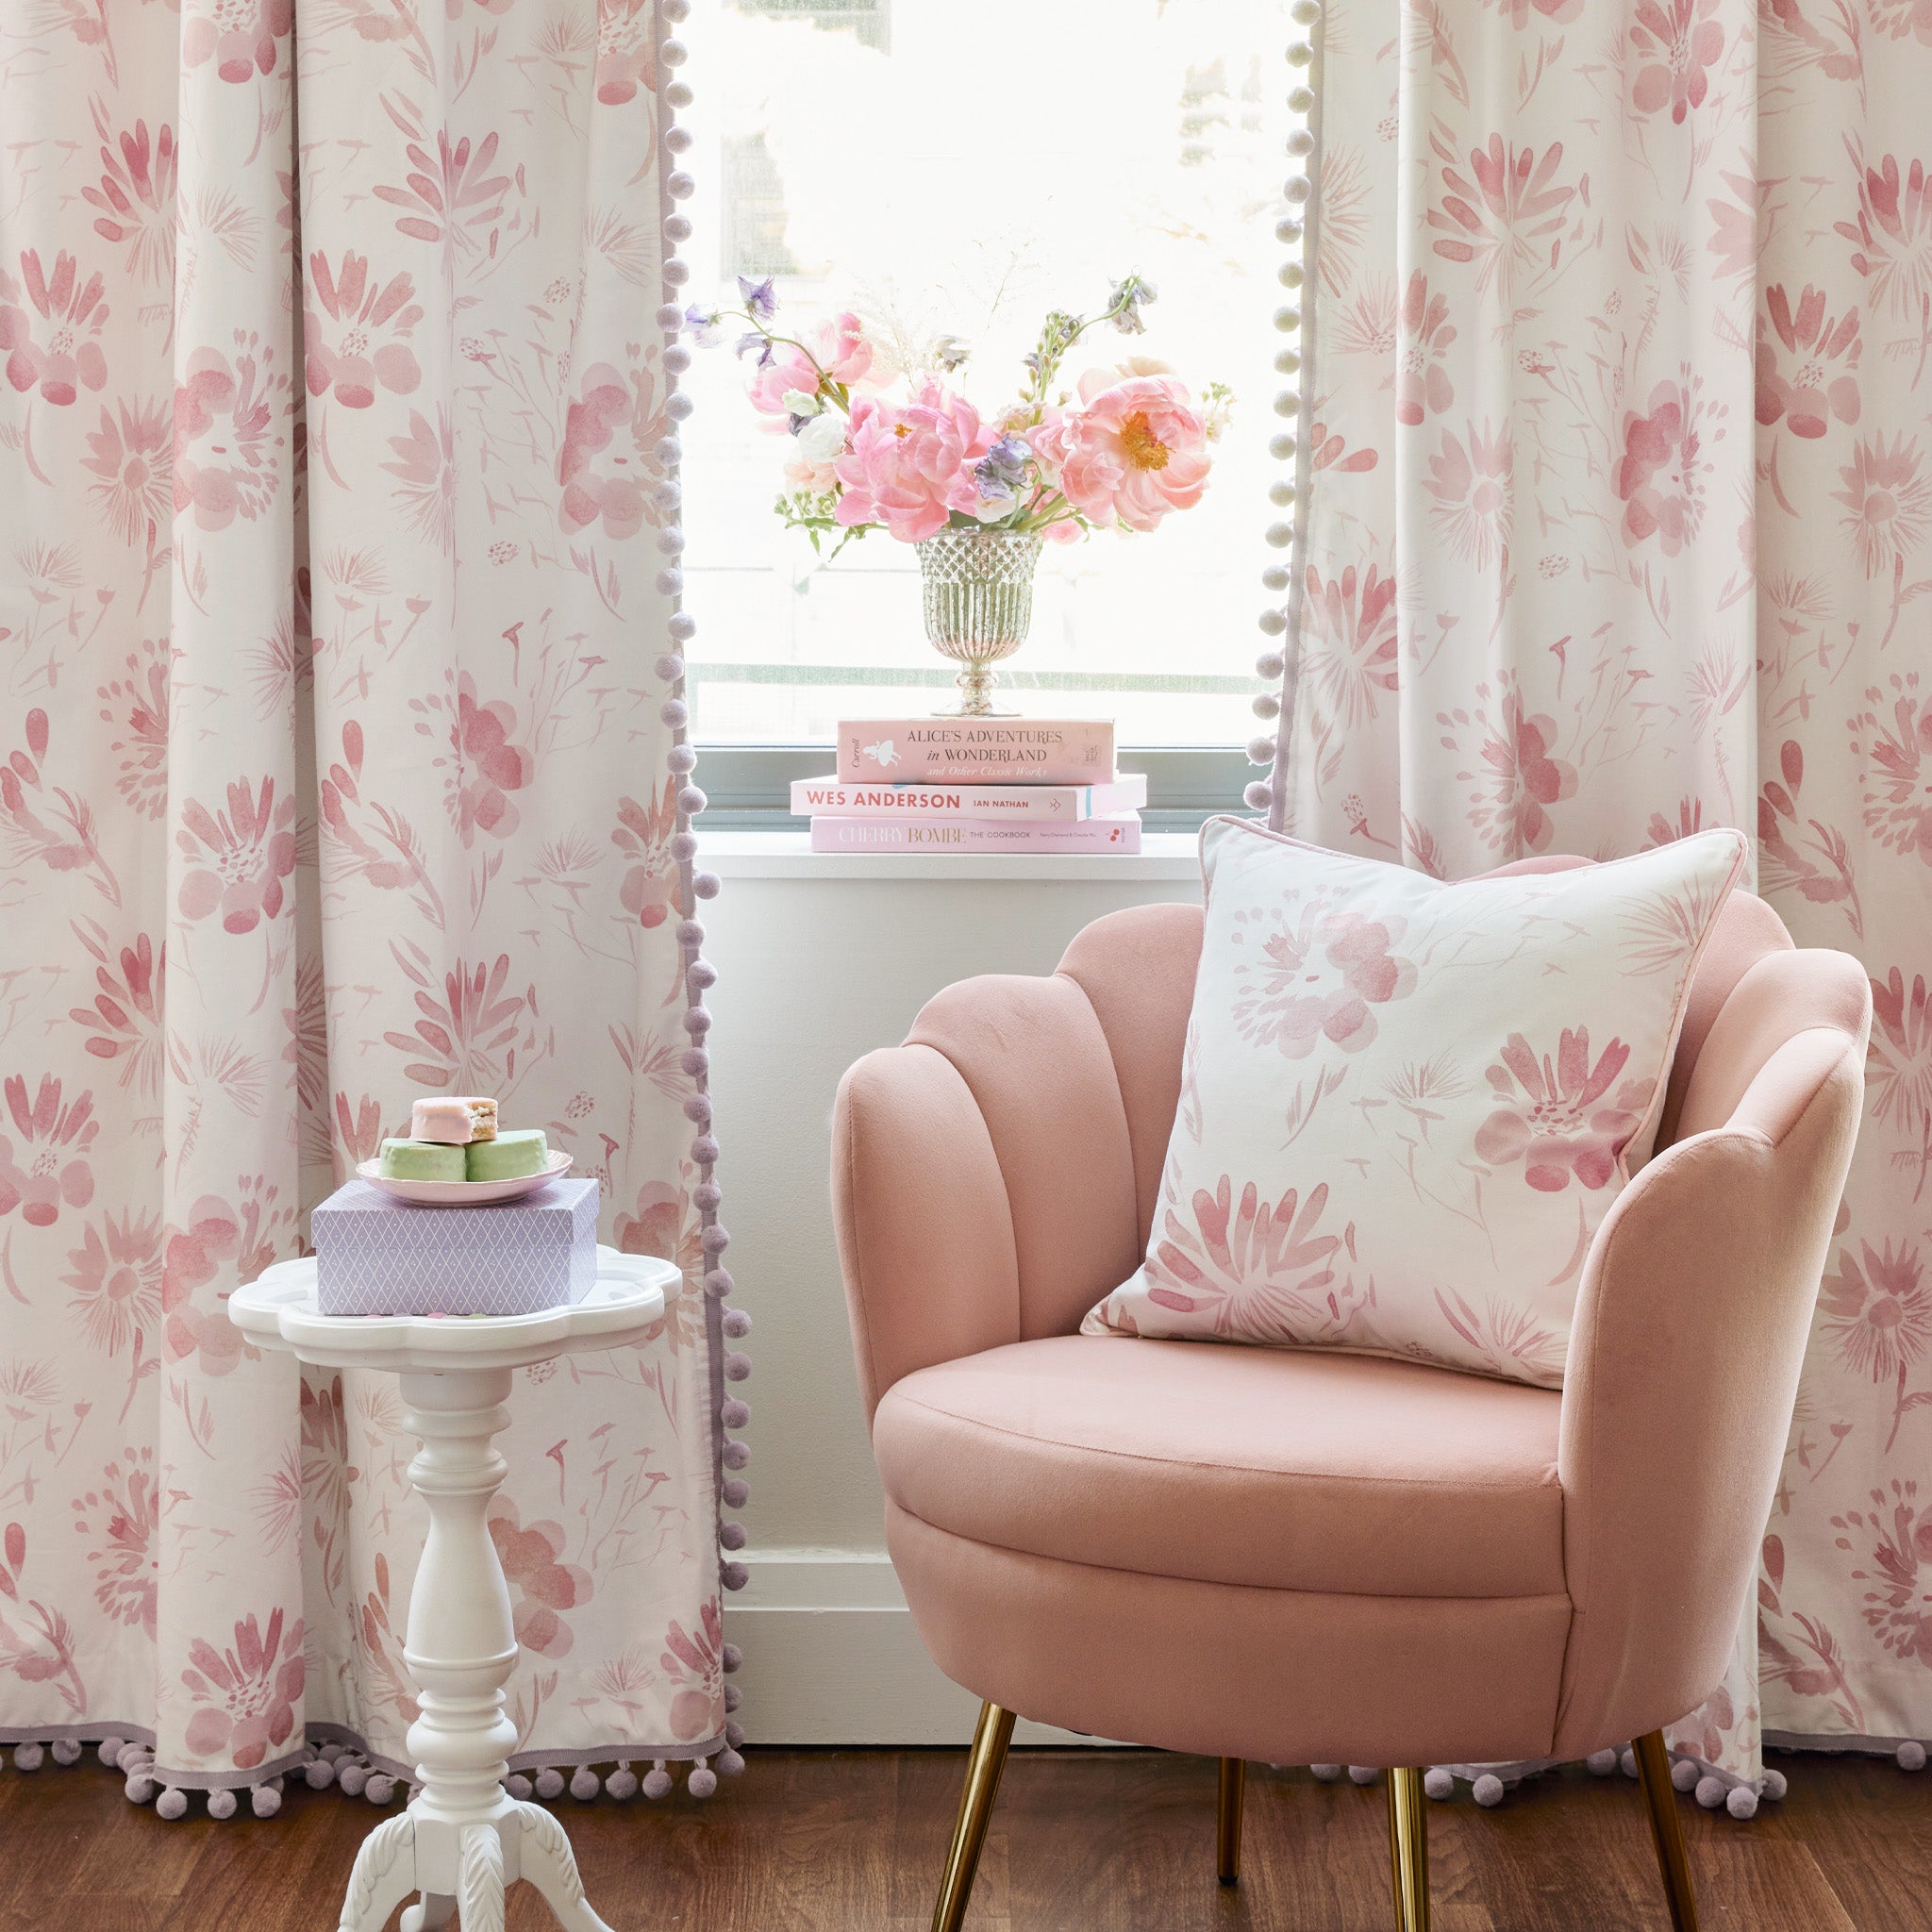 Pink Sofa Chair with Pink Floral Pillow on top and burgundy velvet loafers on the ground by a white small table with a box and dessert plate on top in front of Pink Floral Curtains with books and flower vase on top